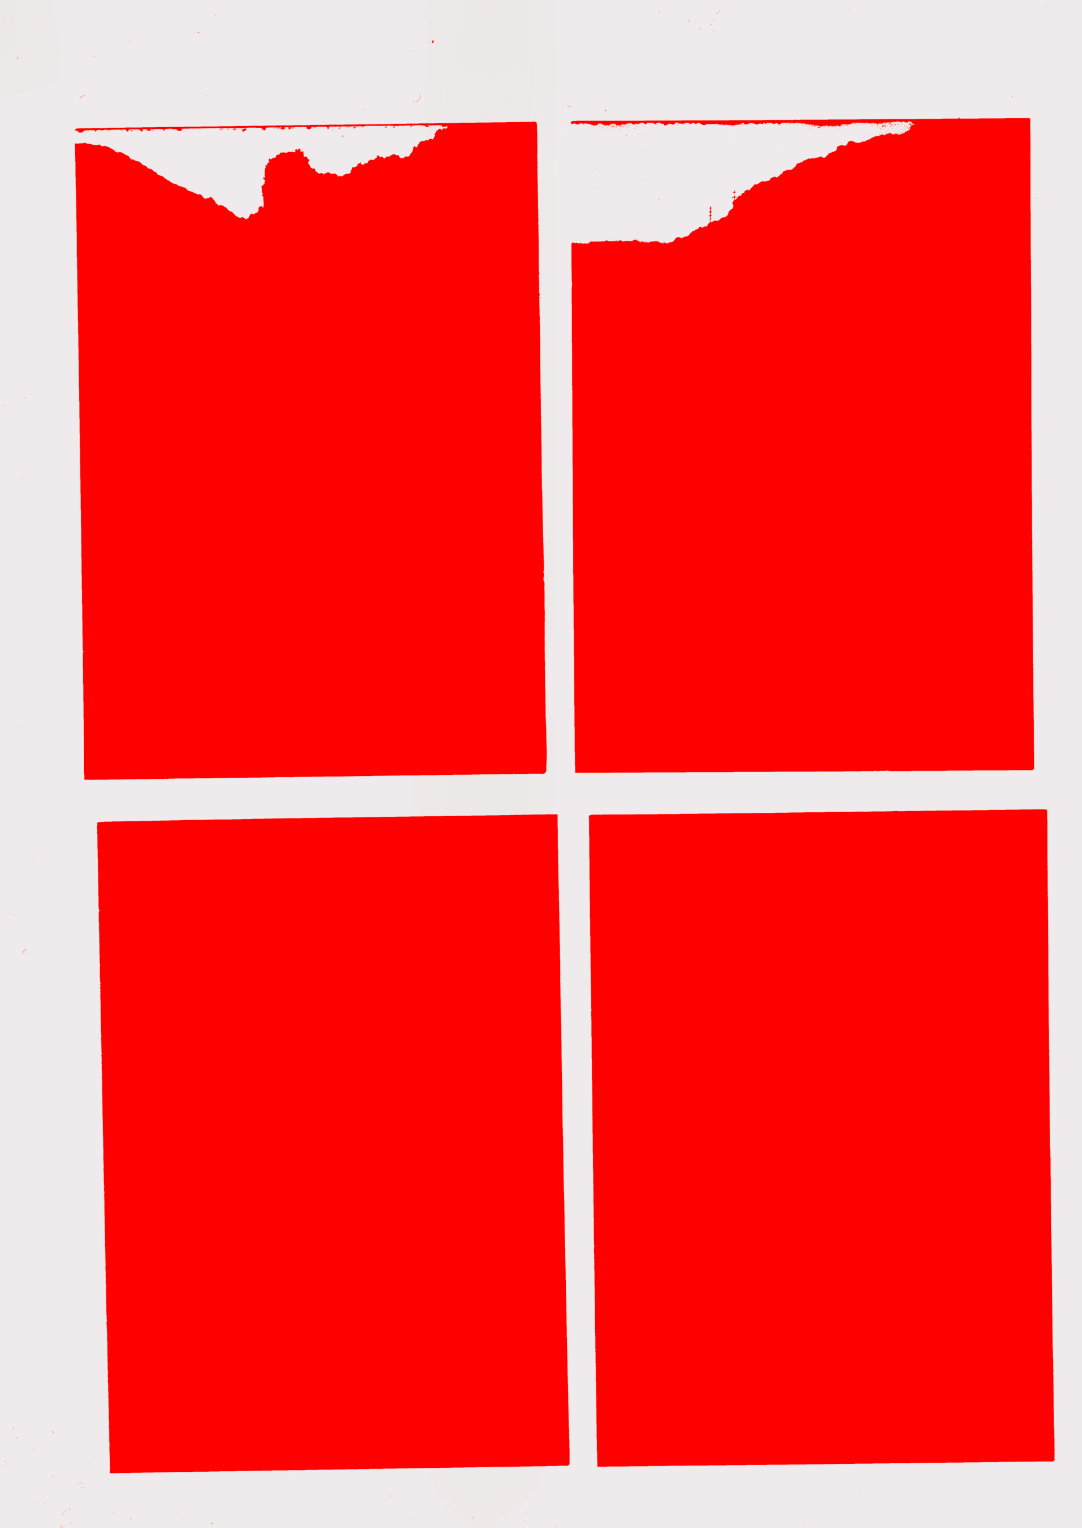 Red rectangles corresponding to the four images